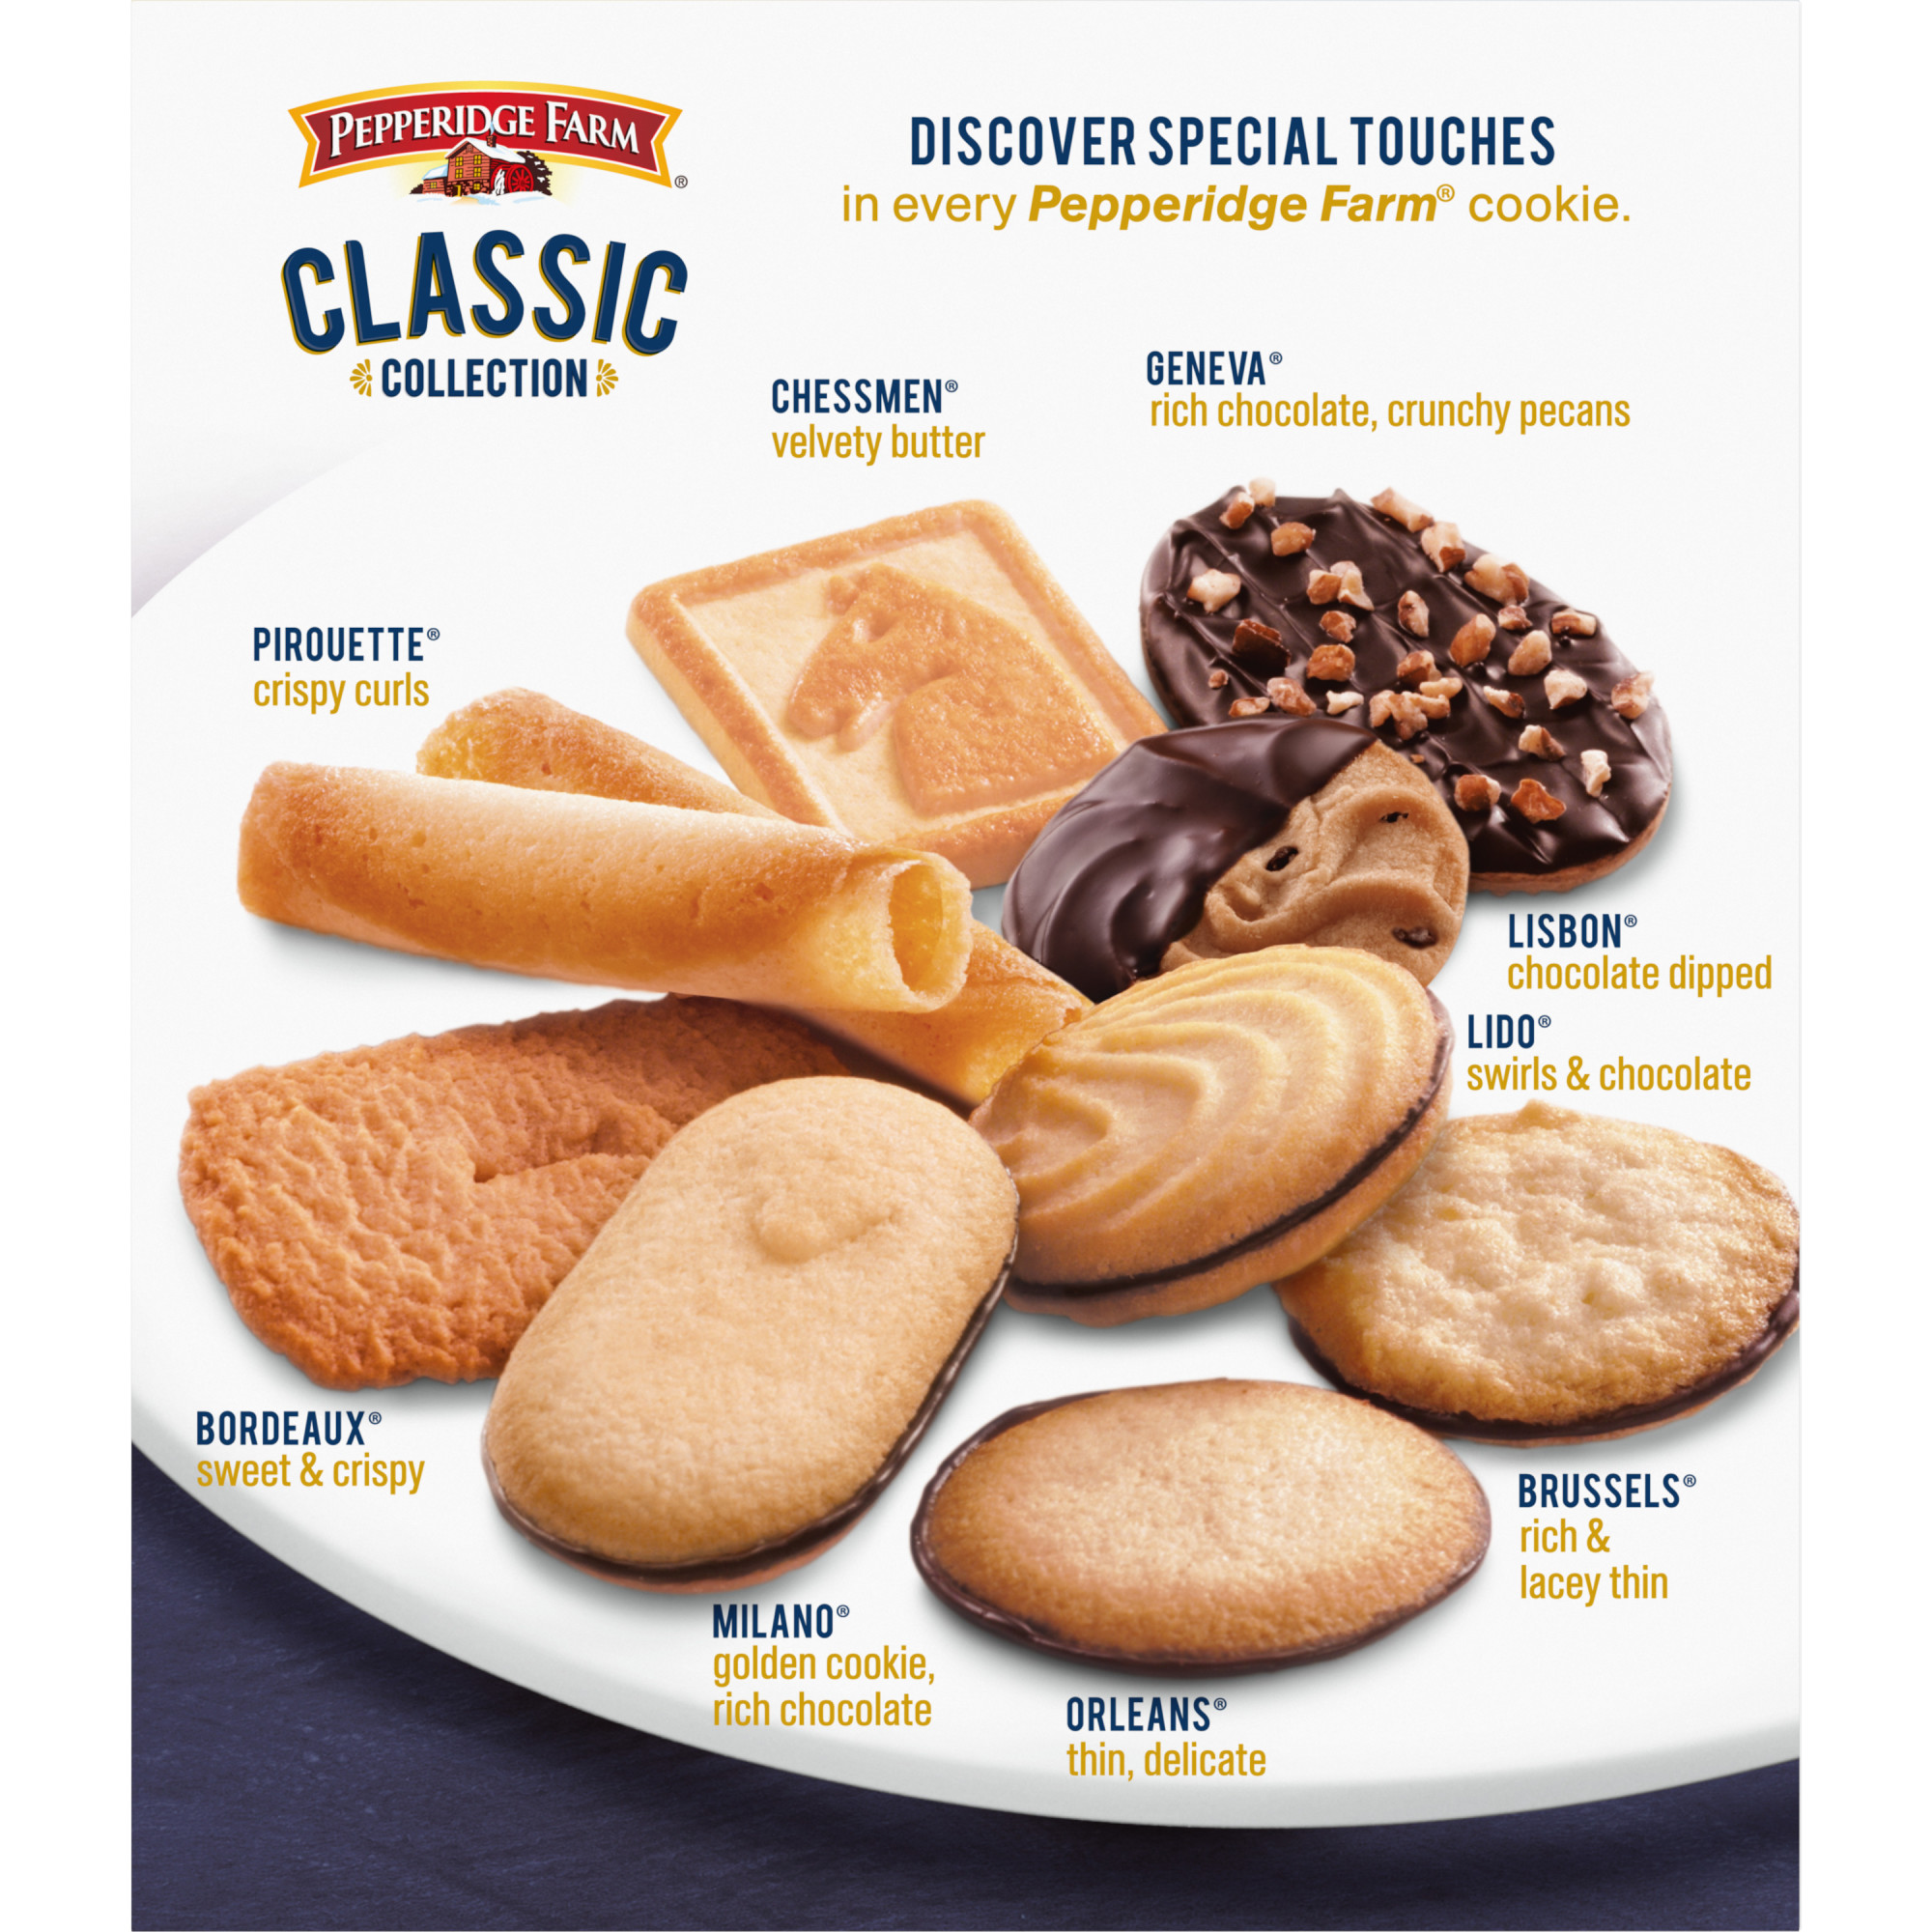 Pepperidge Farm Cookies Classic Collection, 9 Cookie Varieties, 13.25 oz. Box - image 5 of 8